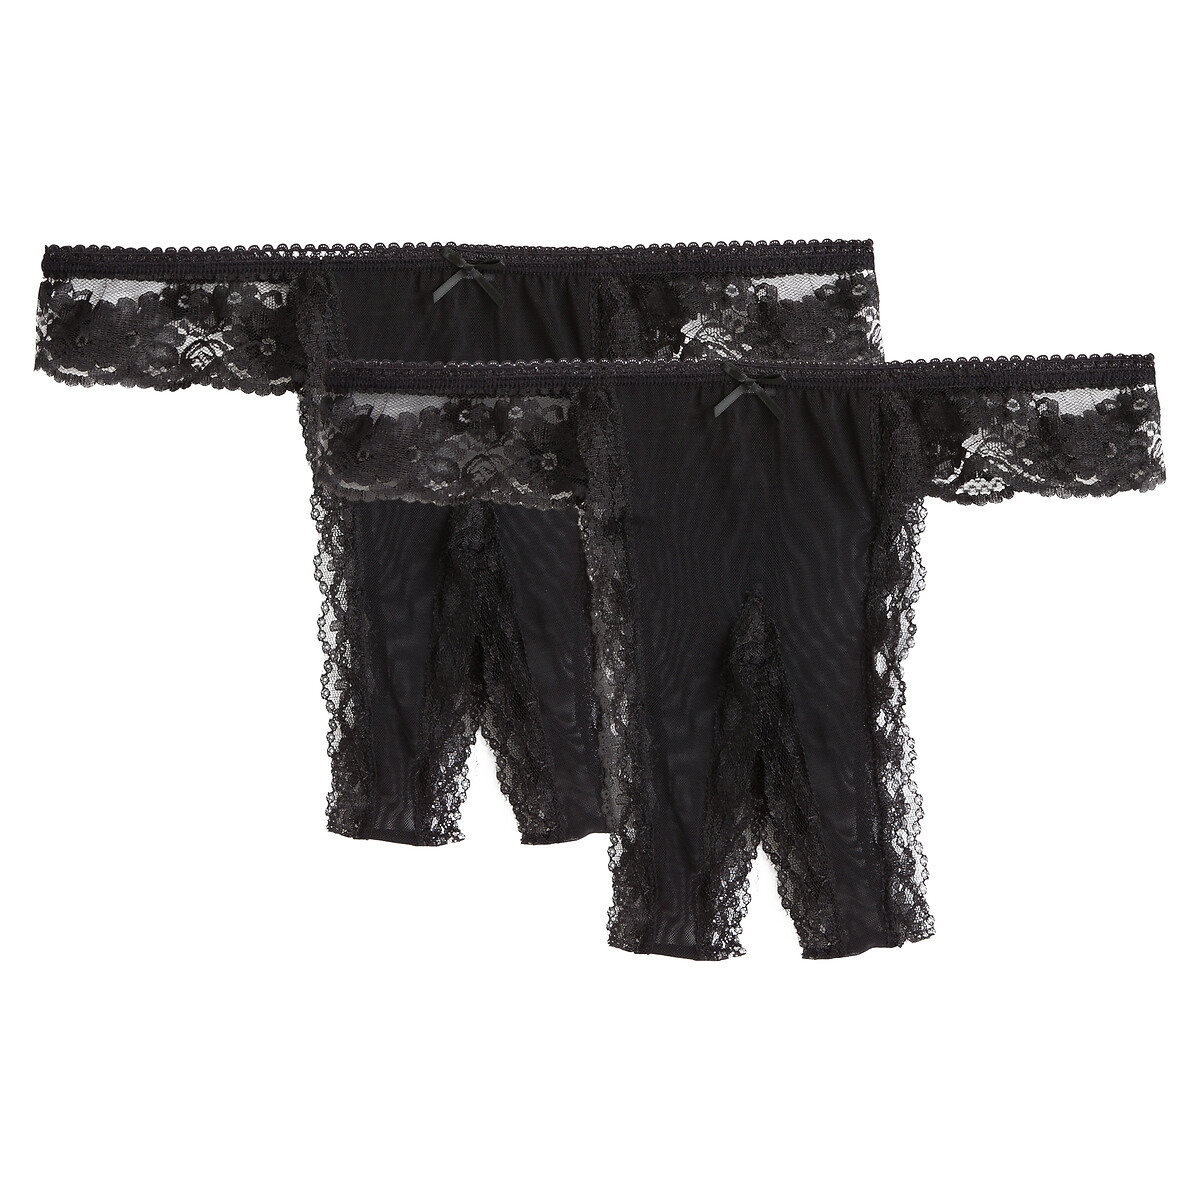 Pack of 2 Crotchless Knickers